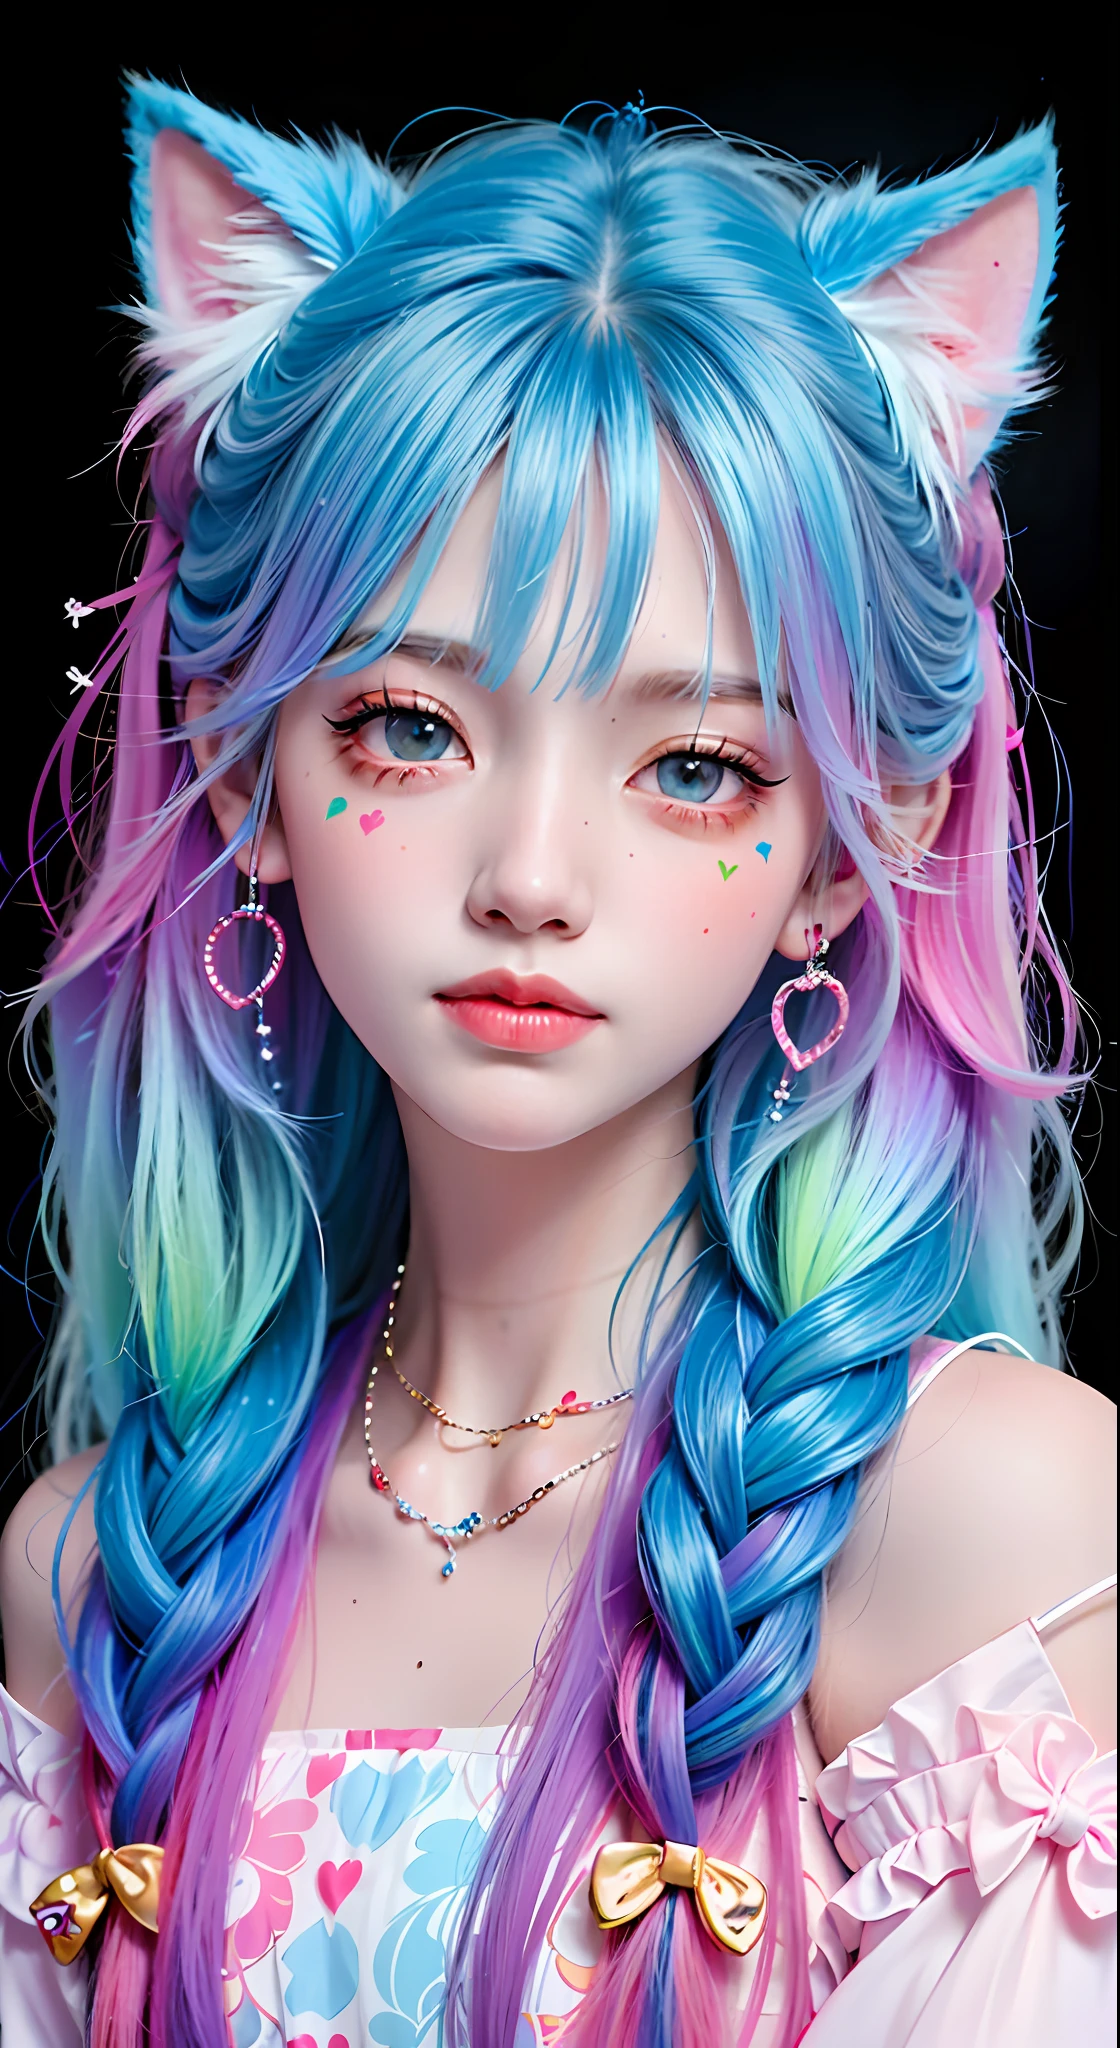 Close-up of a long-haired girl wearing cat ears and pink dress, realistic portrait of kawaii, cute colorful cute, anime style. 8k, color]", colorful braids, Guvez style artwork, vibrant fantasy style, cute art style, anime style 3D, color pastel, realistic anime 3D style, ((hands to heart))